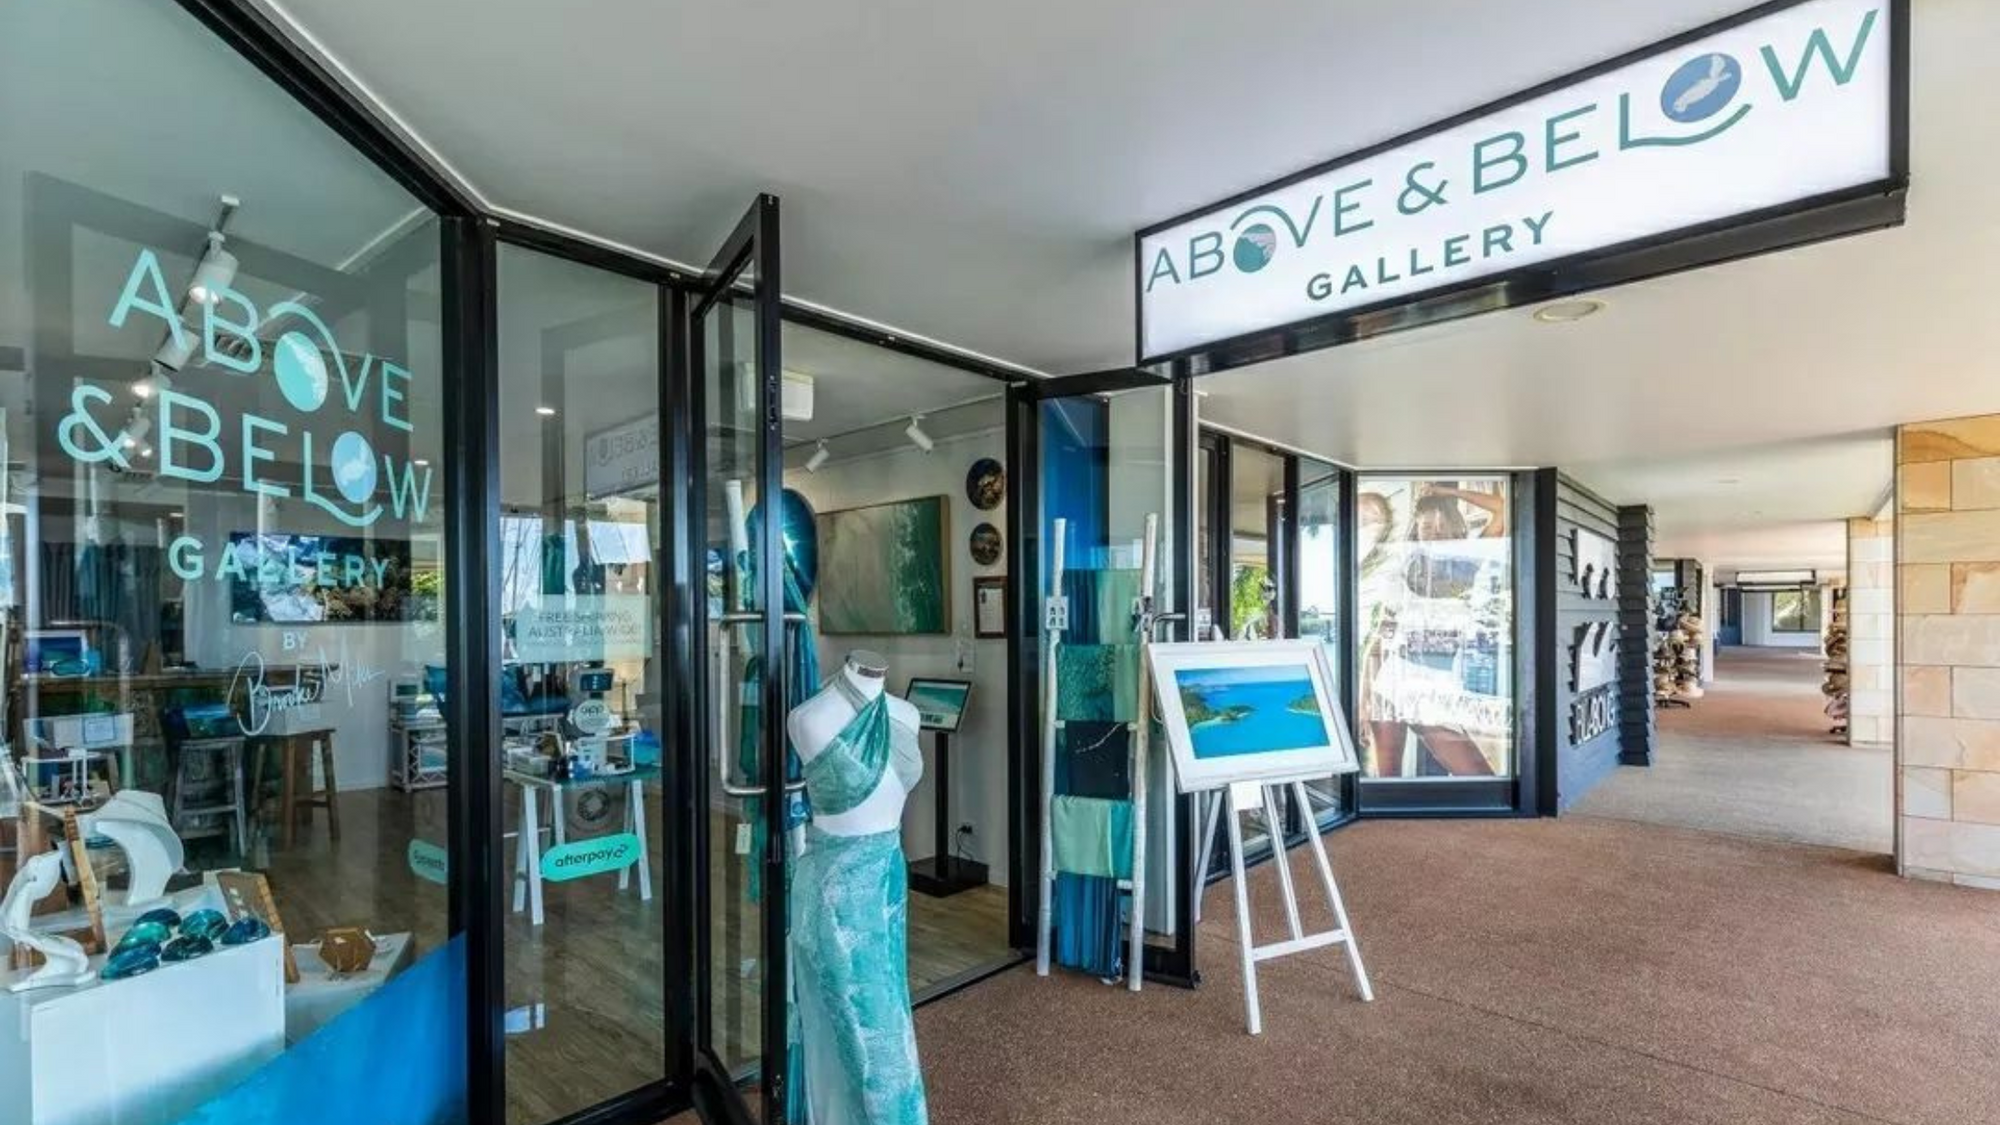 Introducing the NEW Above and Below Gallery!